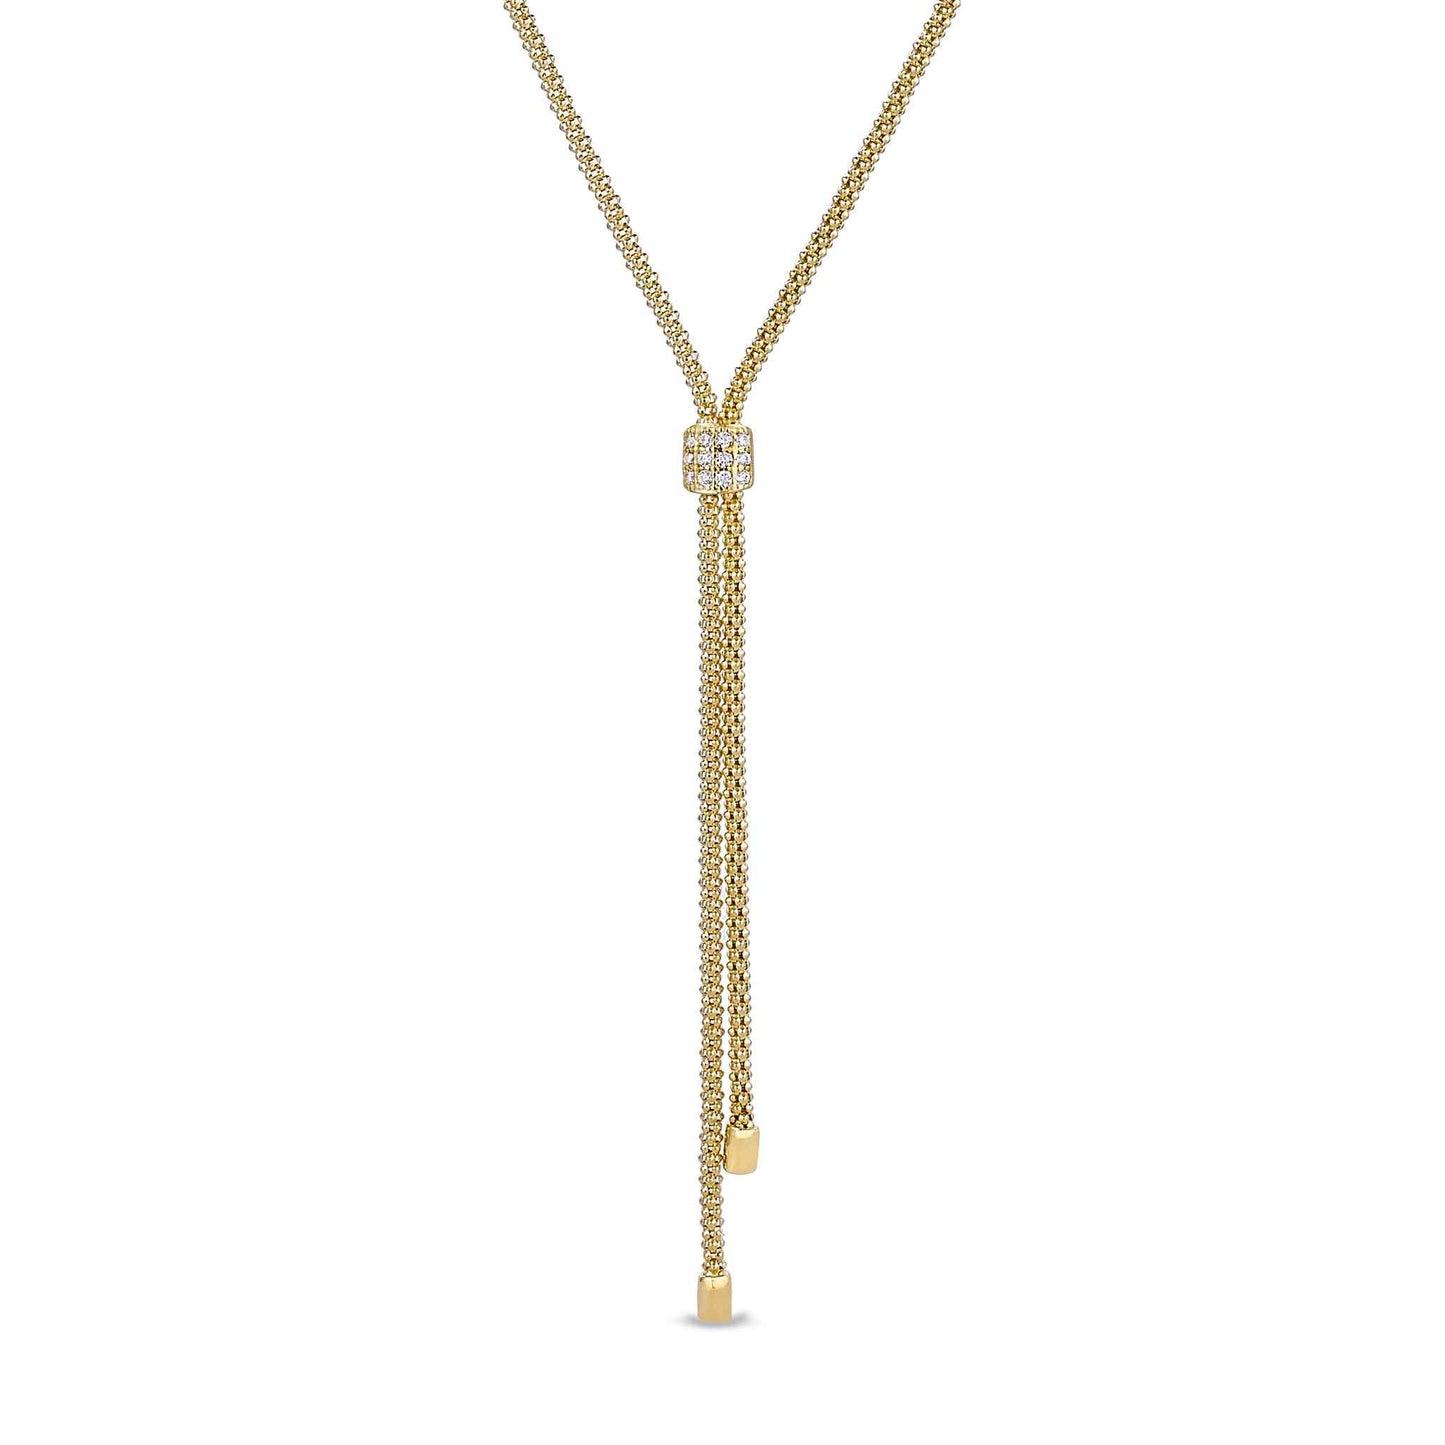 A lariat necklace with simulated diamond square accent displayed on a neutral white background.